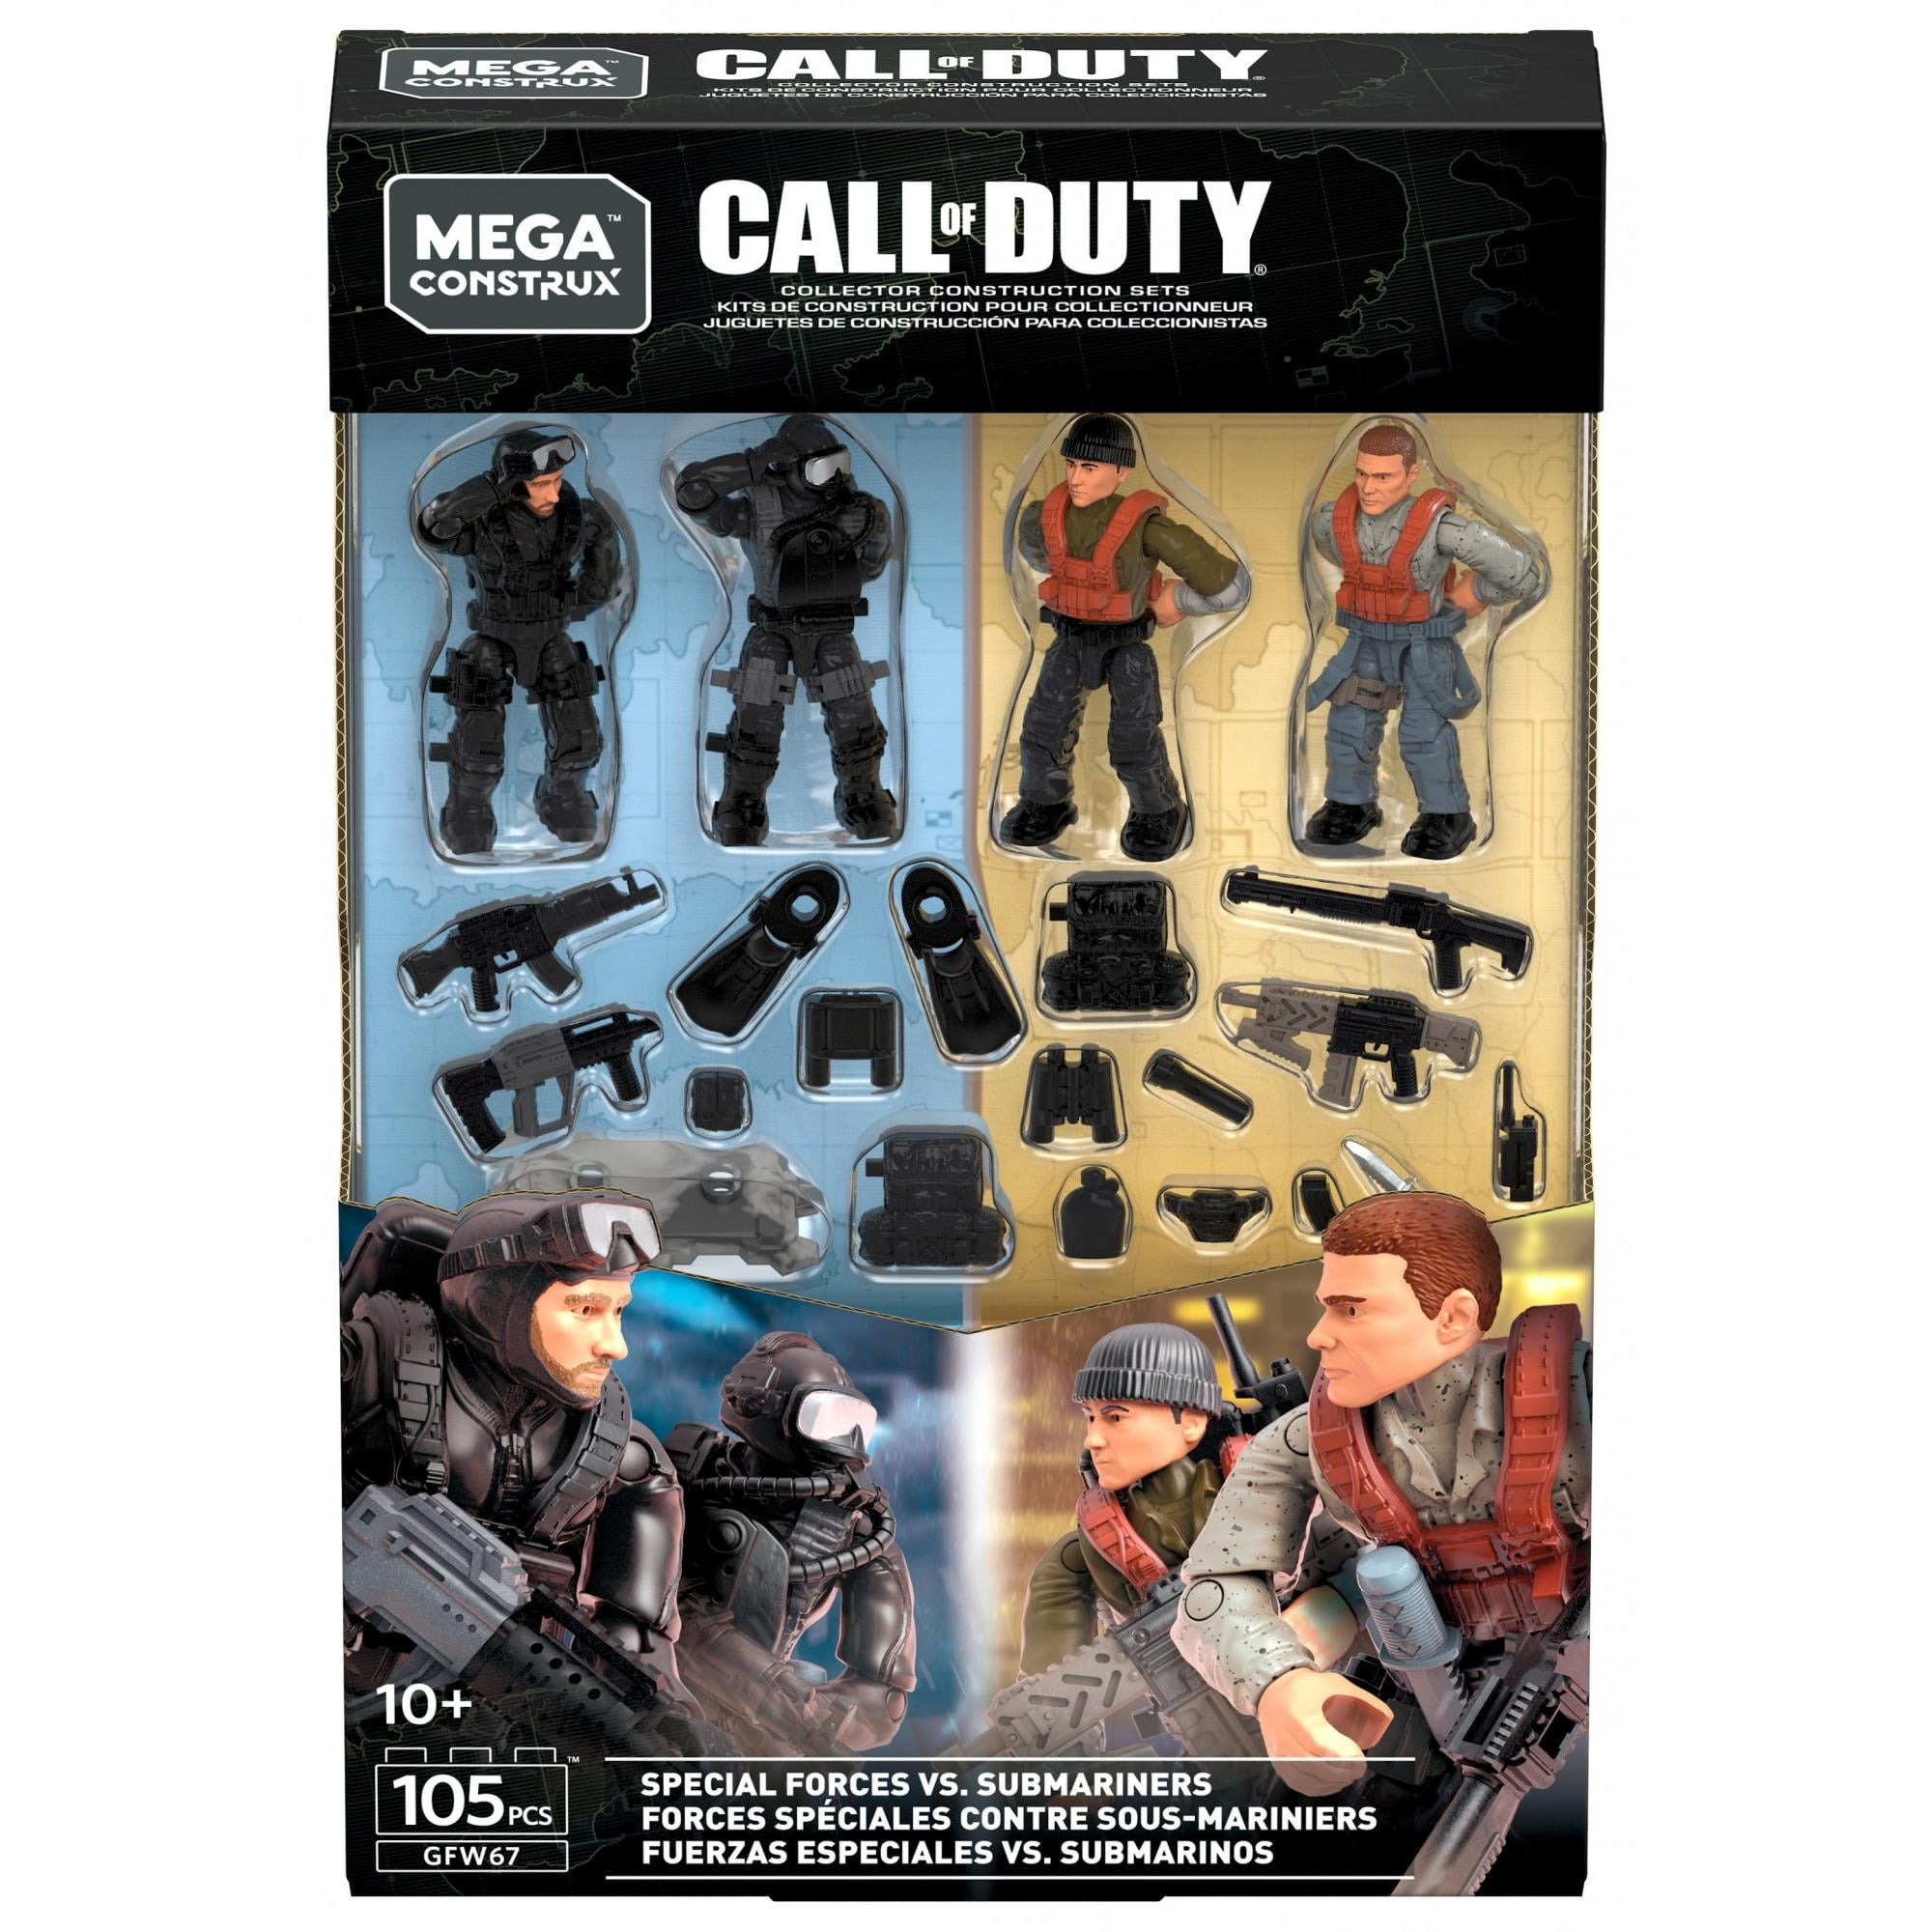 Mega Construx Call of Duty Series 4 Figures Complete Collection You Pick 